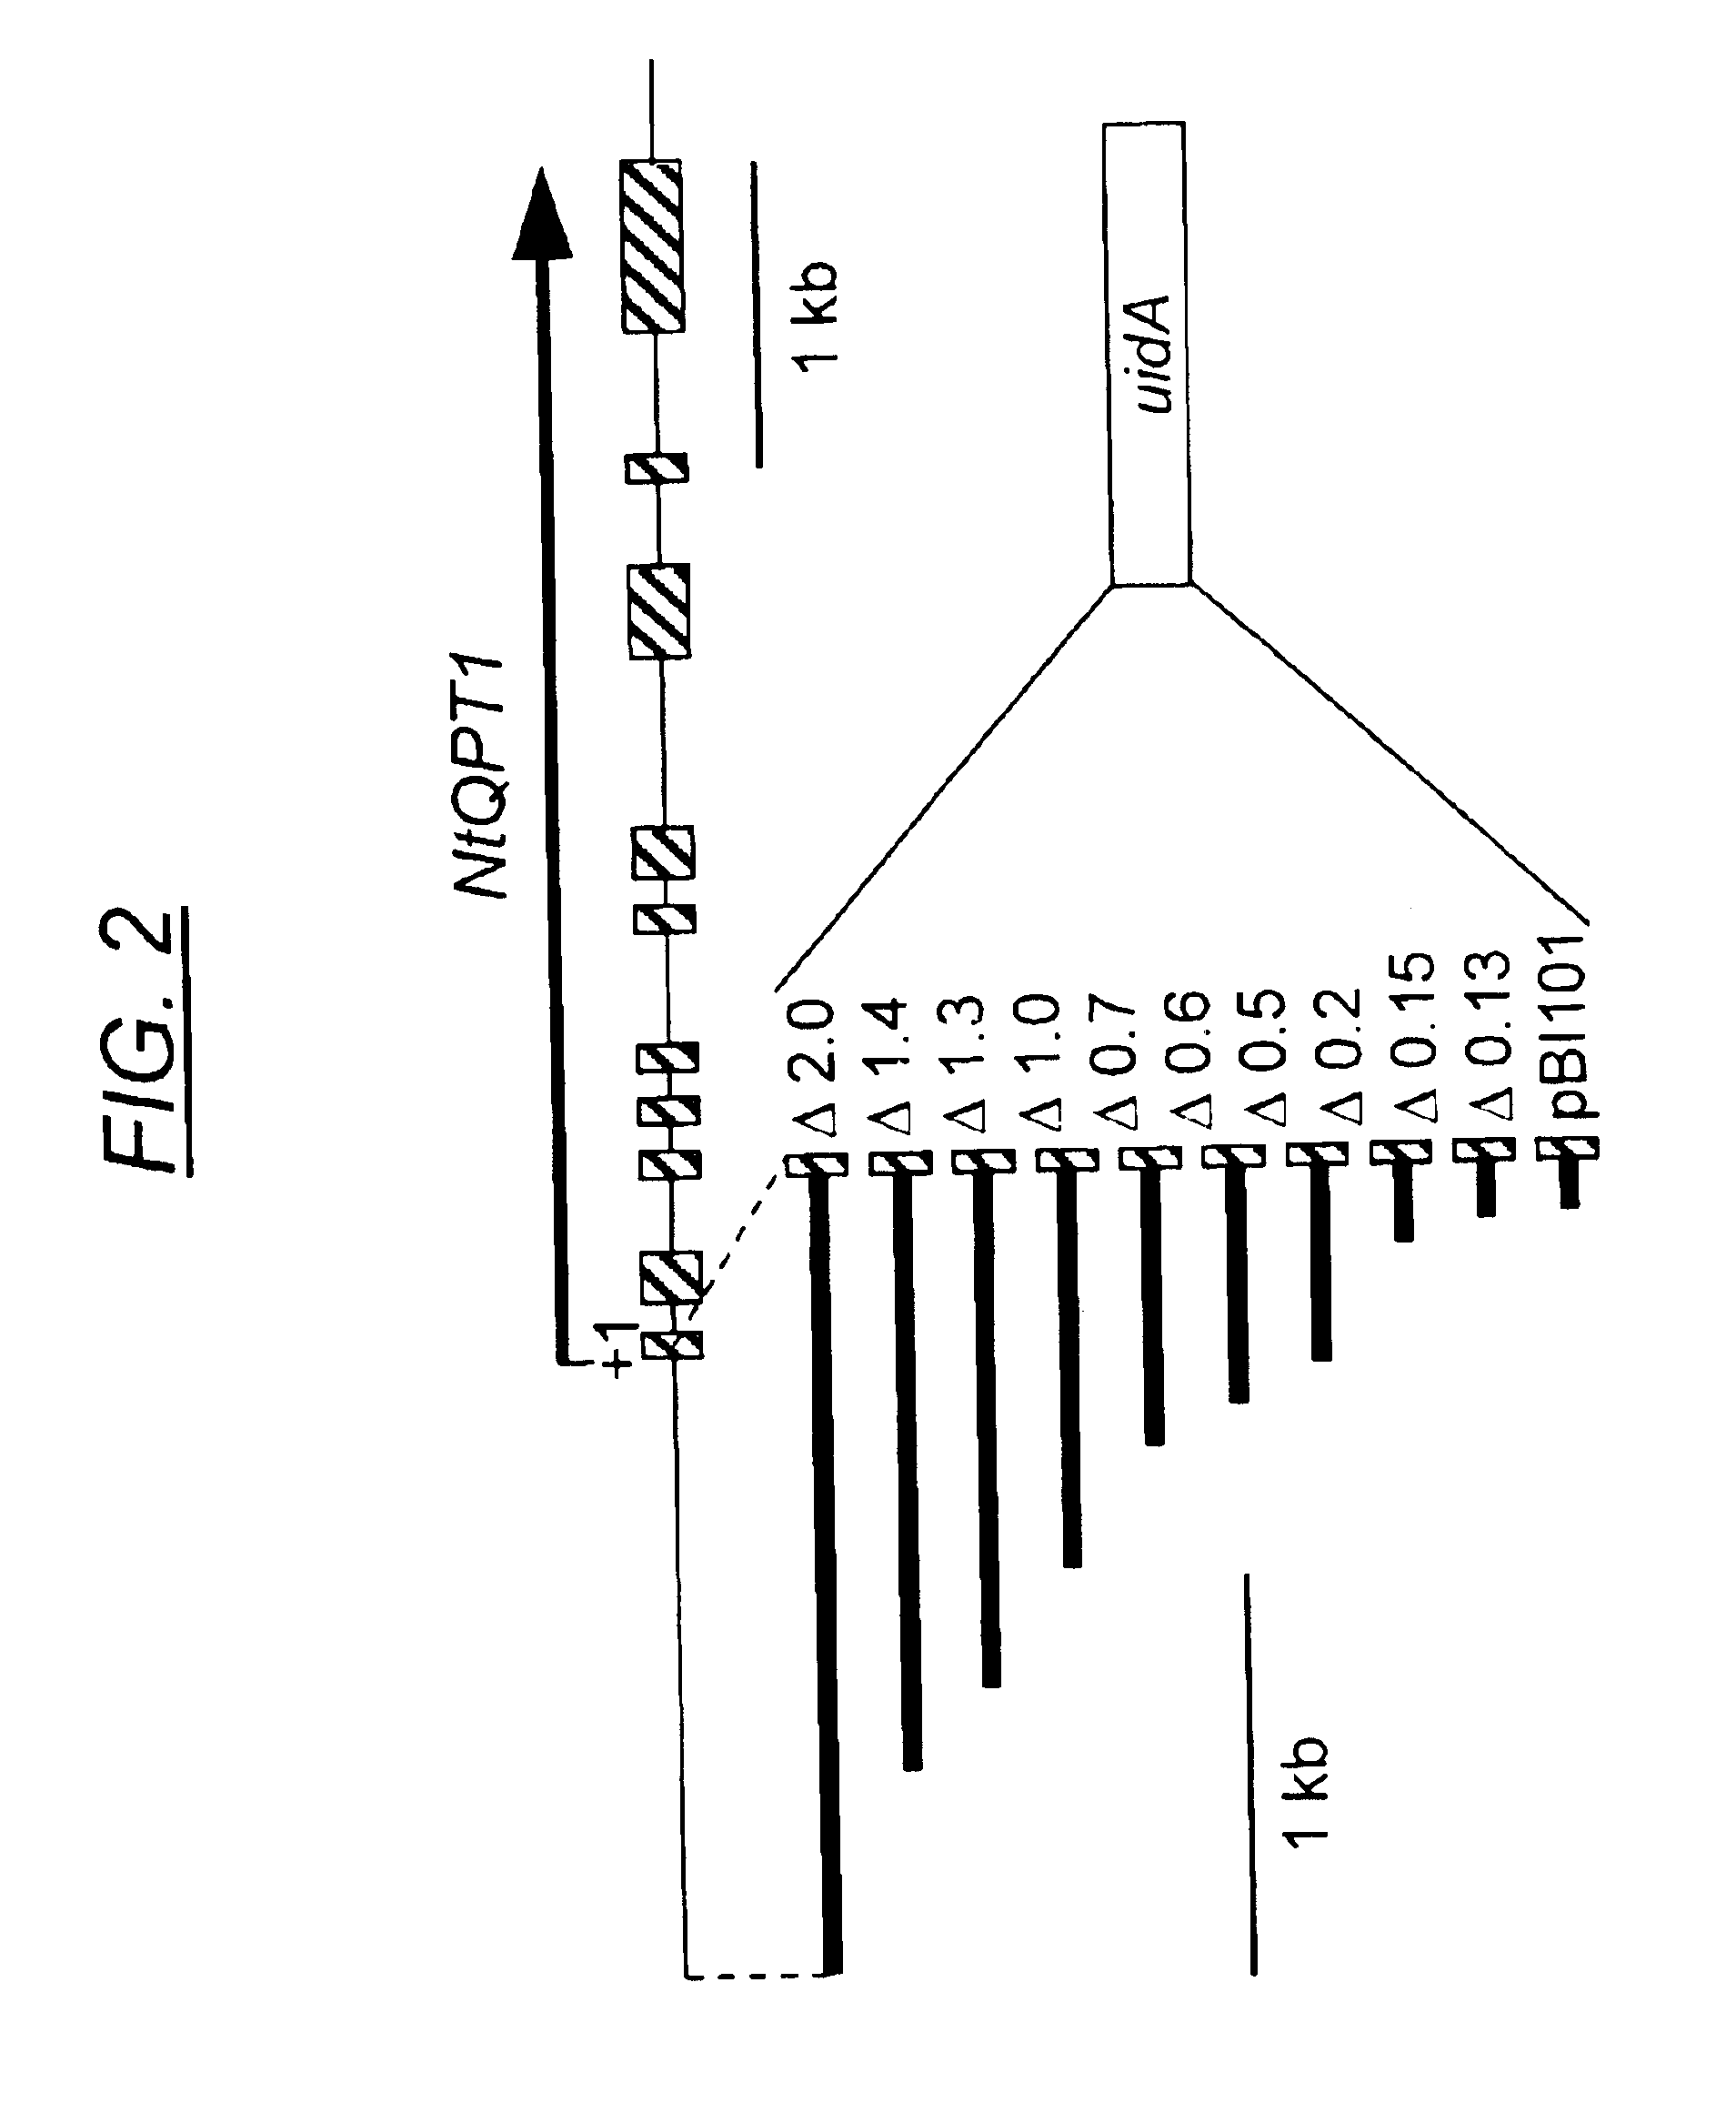 Promoter fragment that is recognized by the product of the tobacco Nic gene